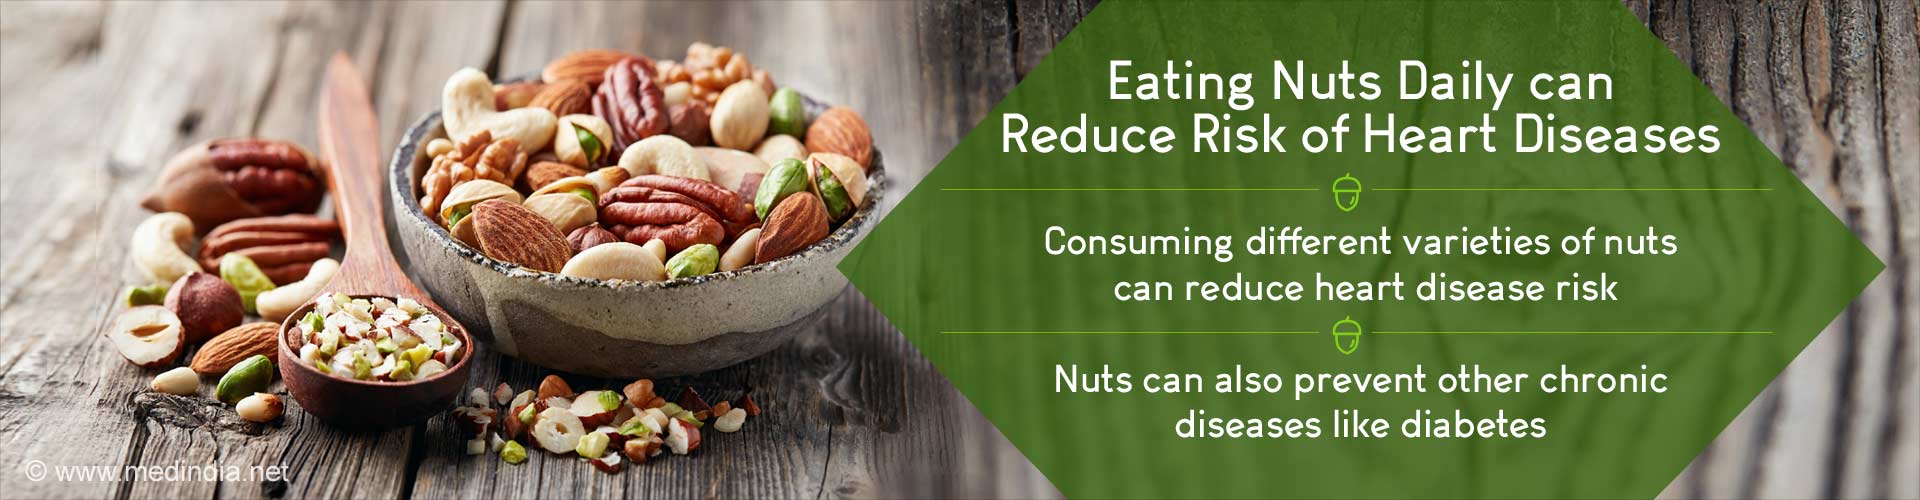 Daily Consumption of Nuts Lower Risk of Heart Disease